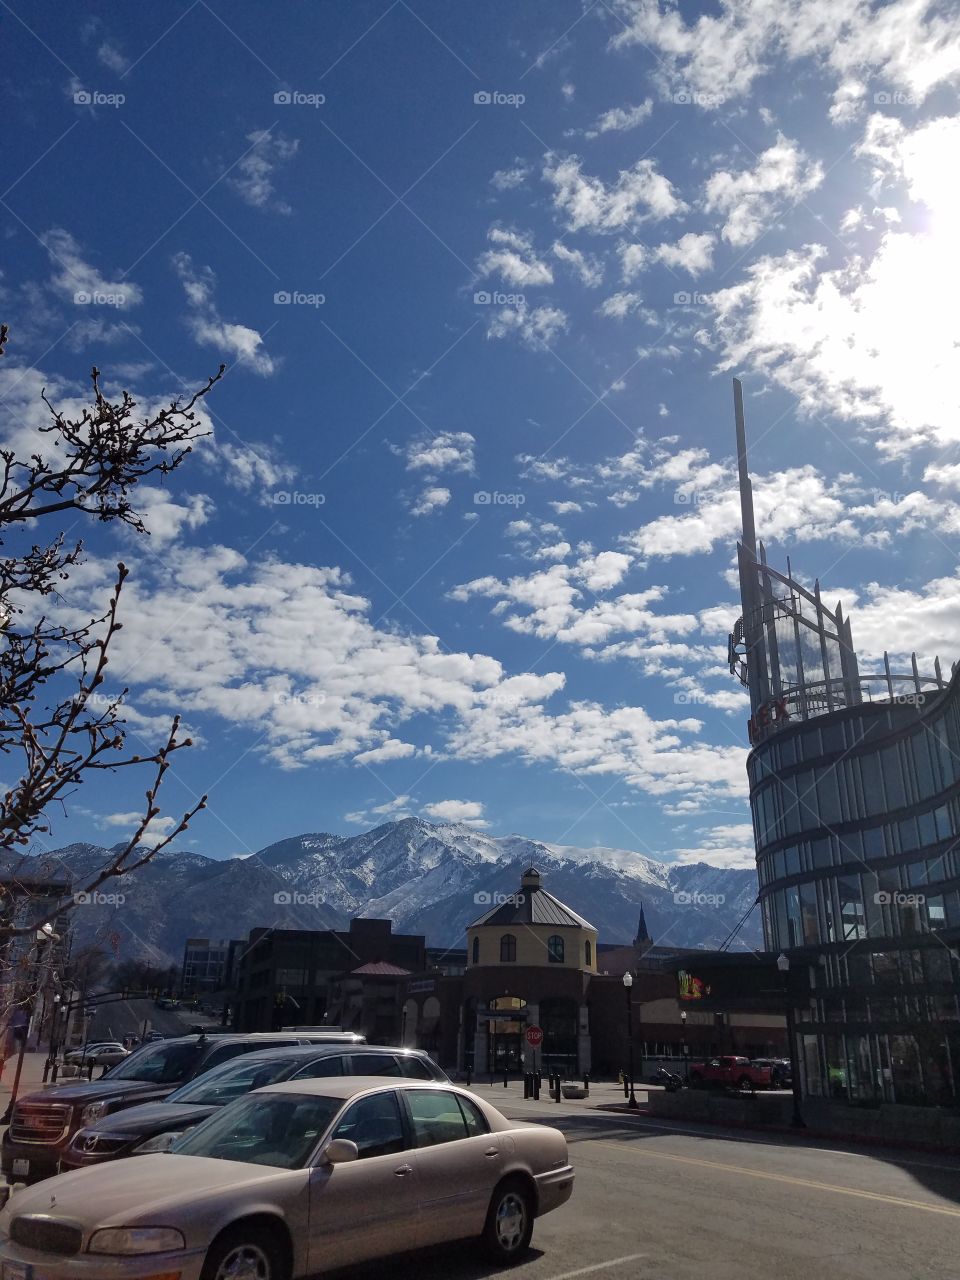 downtown Ogden, pretty urban life mixing in with scenic mountains in the background.